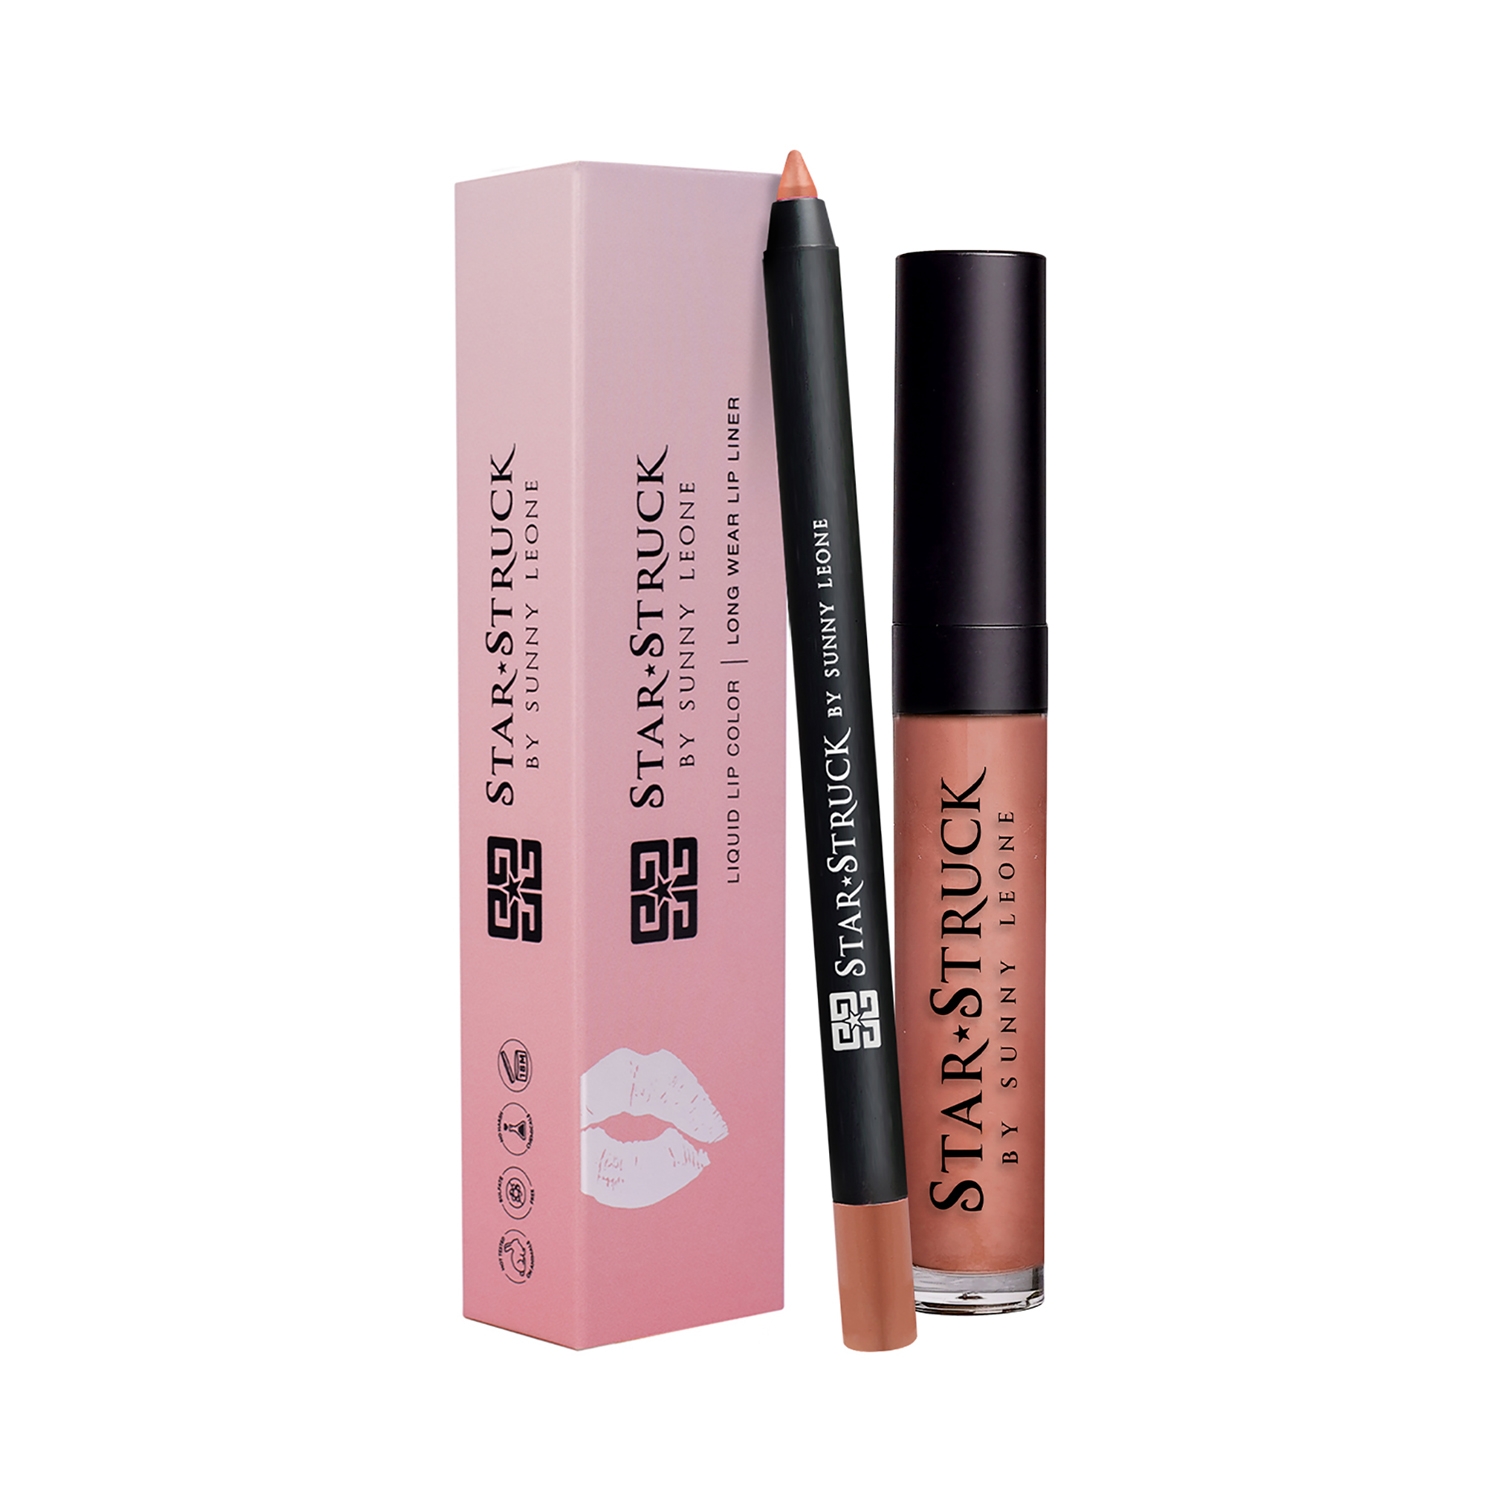 Star Struck by Sunny Leone | Star Struck by Sunny Leone Long Wear Lip Liner And Lip Gloss - Toffee (2 Pcs)